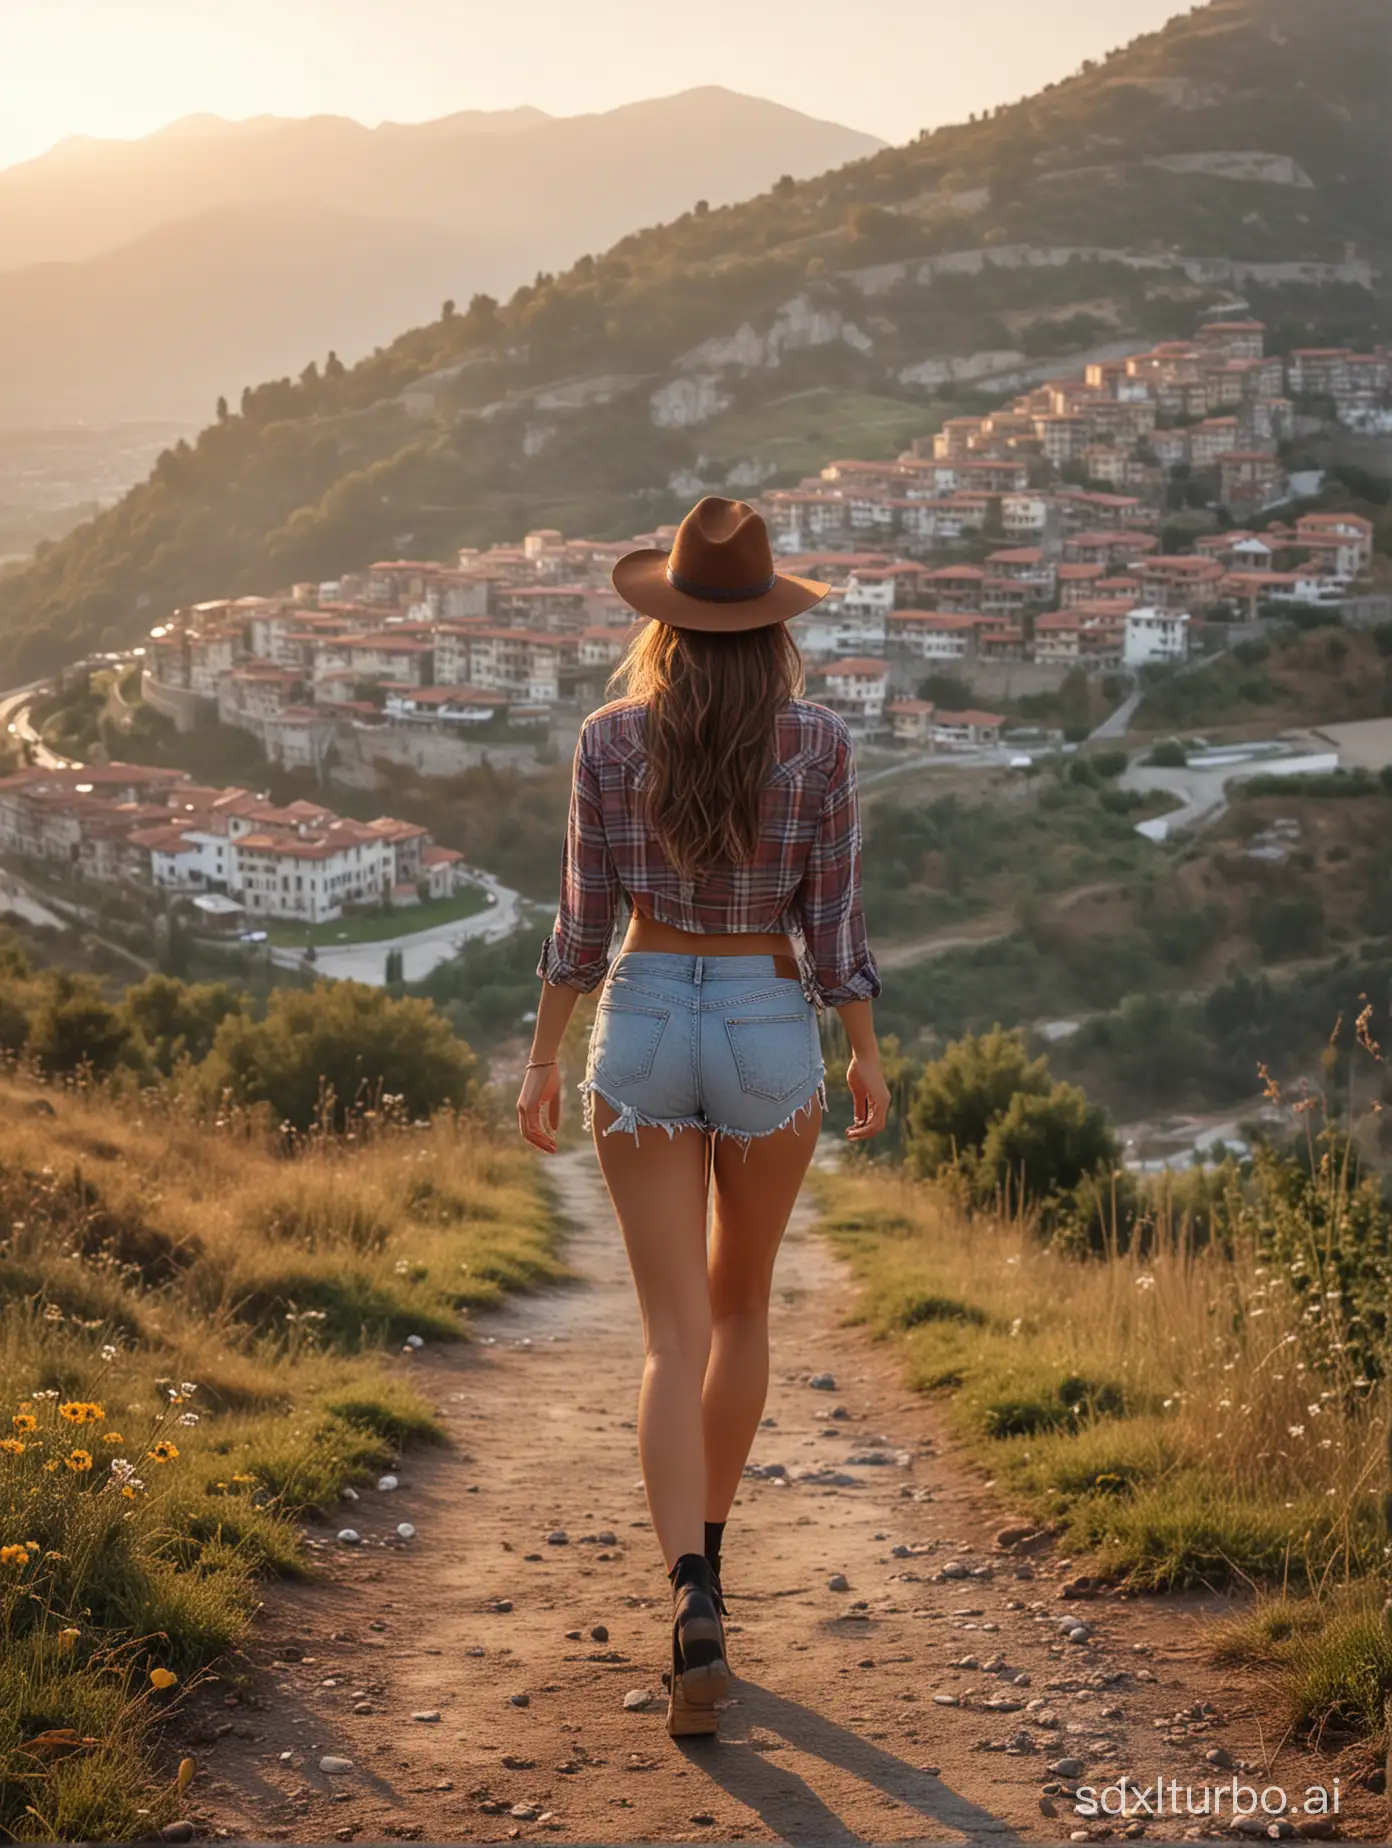 Professional Photo of back of young Italian woman walking with her bike away from viewer. Dressed with ripped daisy dukes and crop top flannel shirt. Revealing clothes. Wearing a hat. fat thick legs. old italian city on a hill in background, large mountains in the background, wide angle shot, aerial view, harmonious atmosphere, warm autumn colours, Sunset. Mist in valley